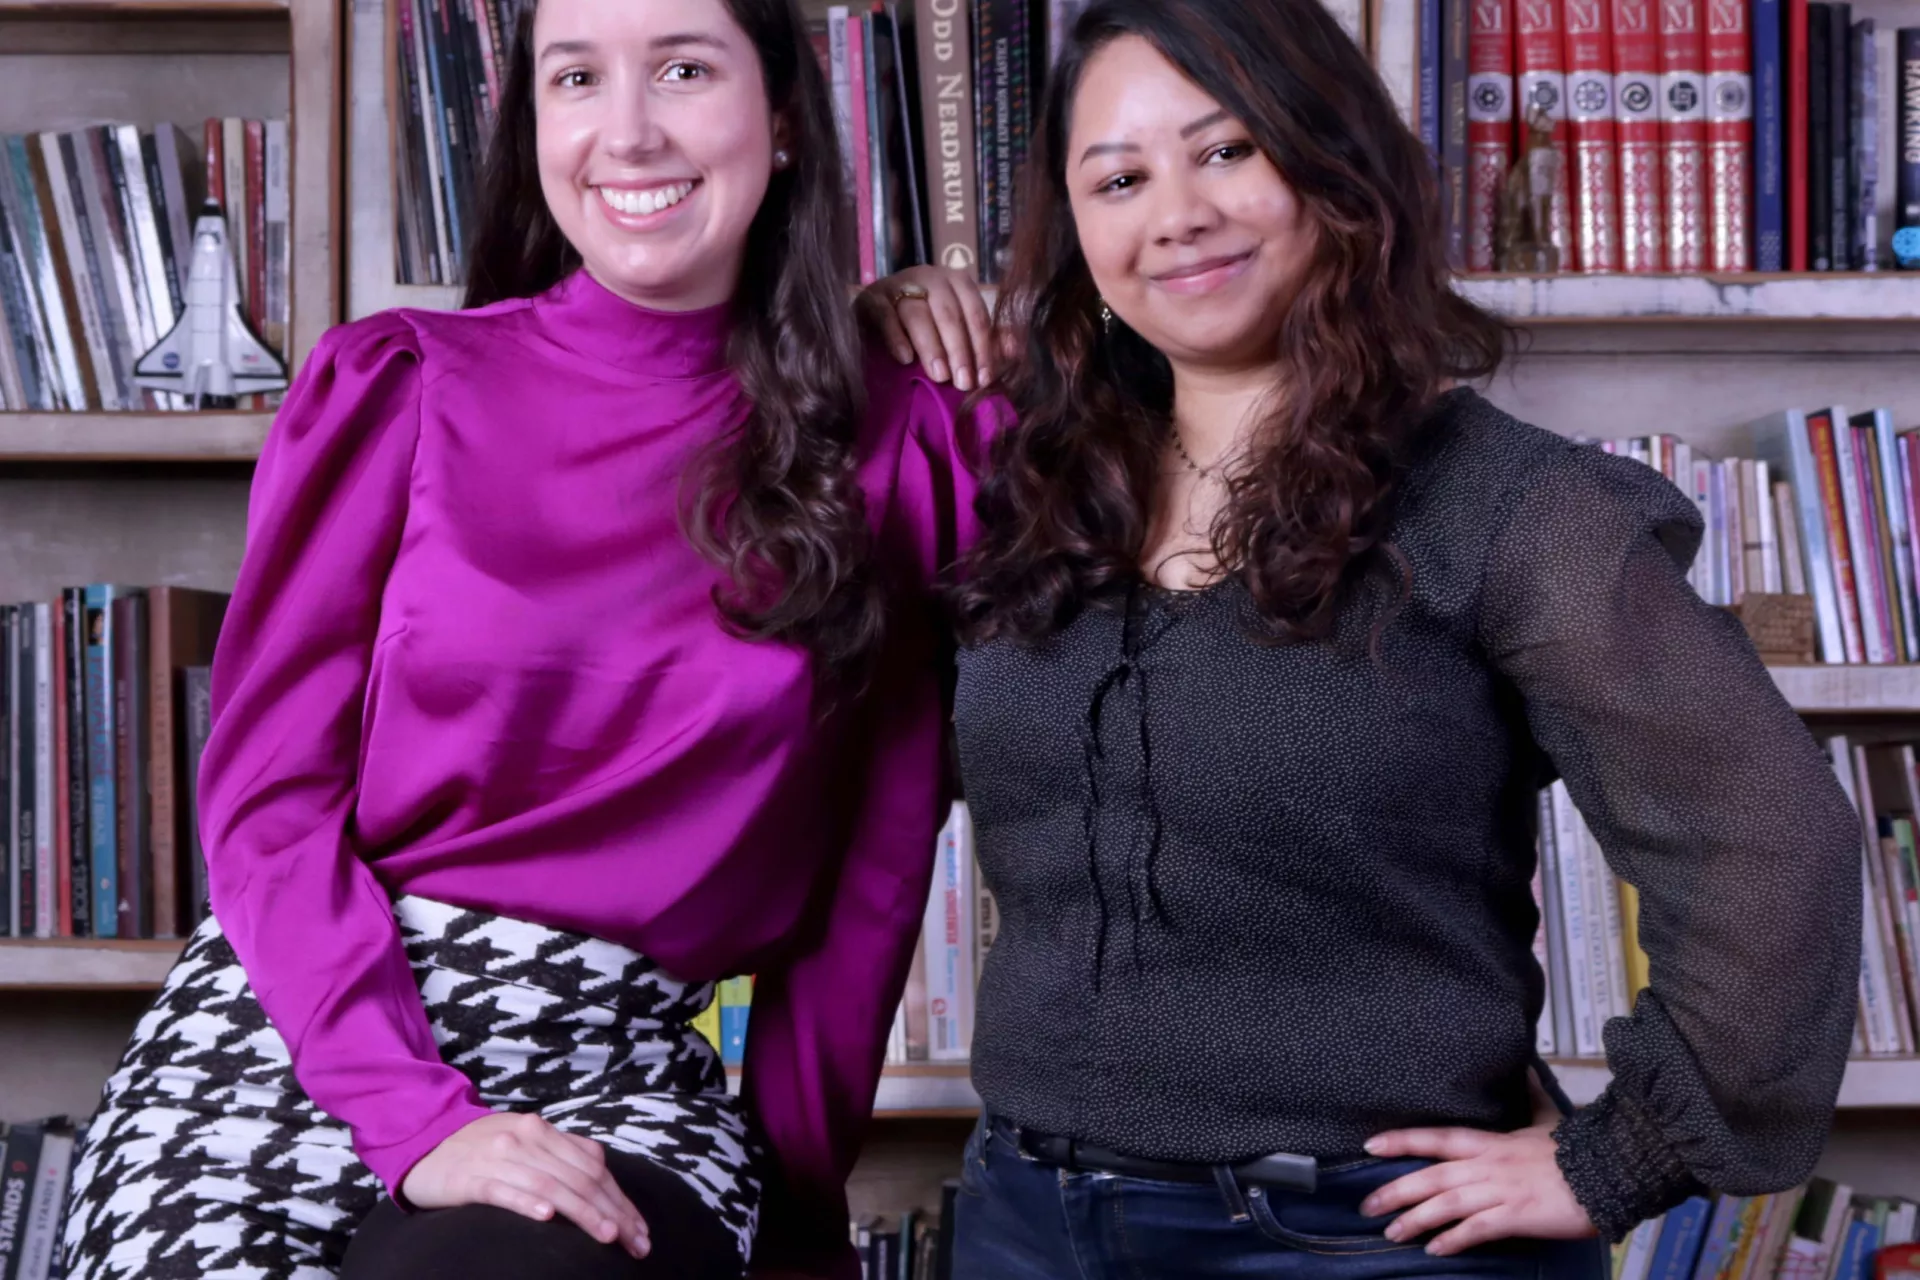 Andrea and Miroslava posing next to each other in front of a bookcase